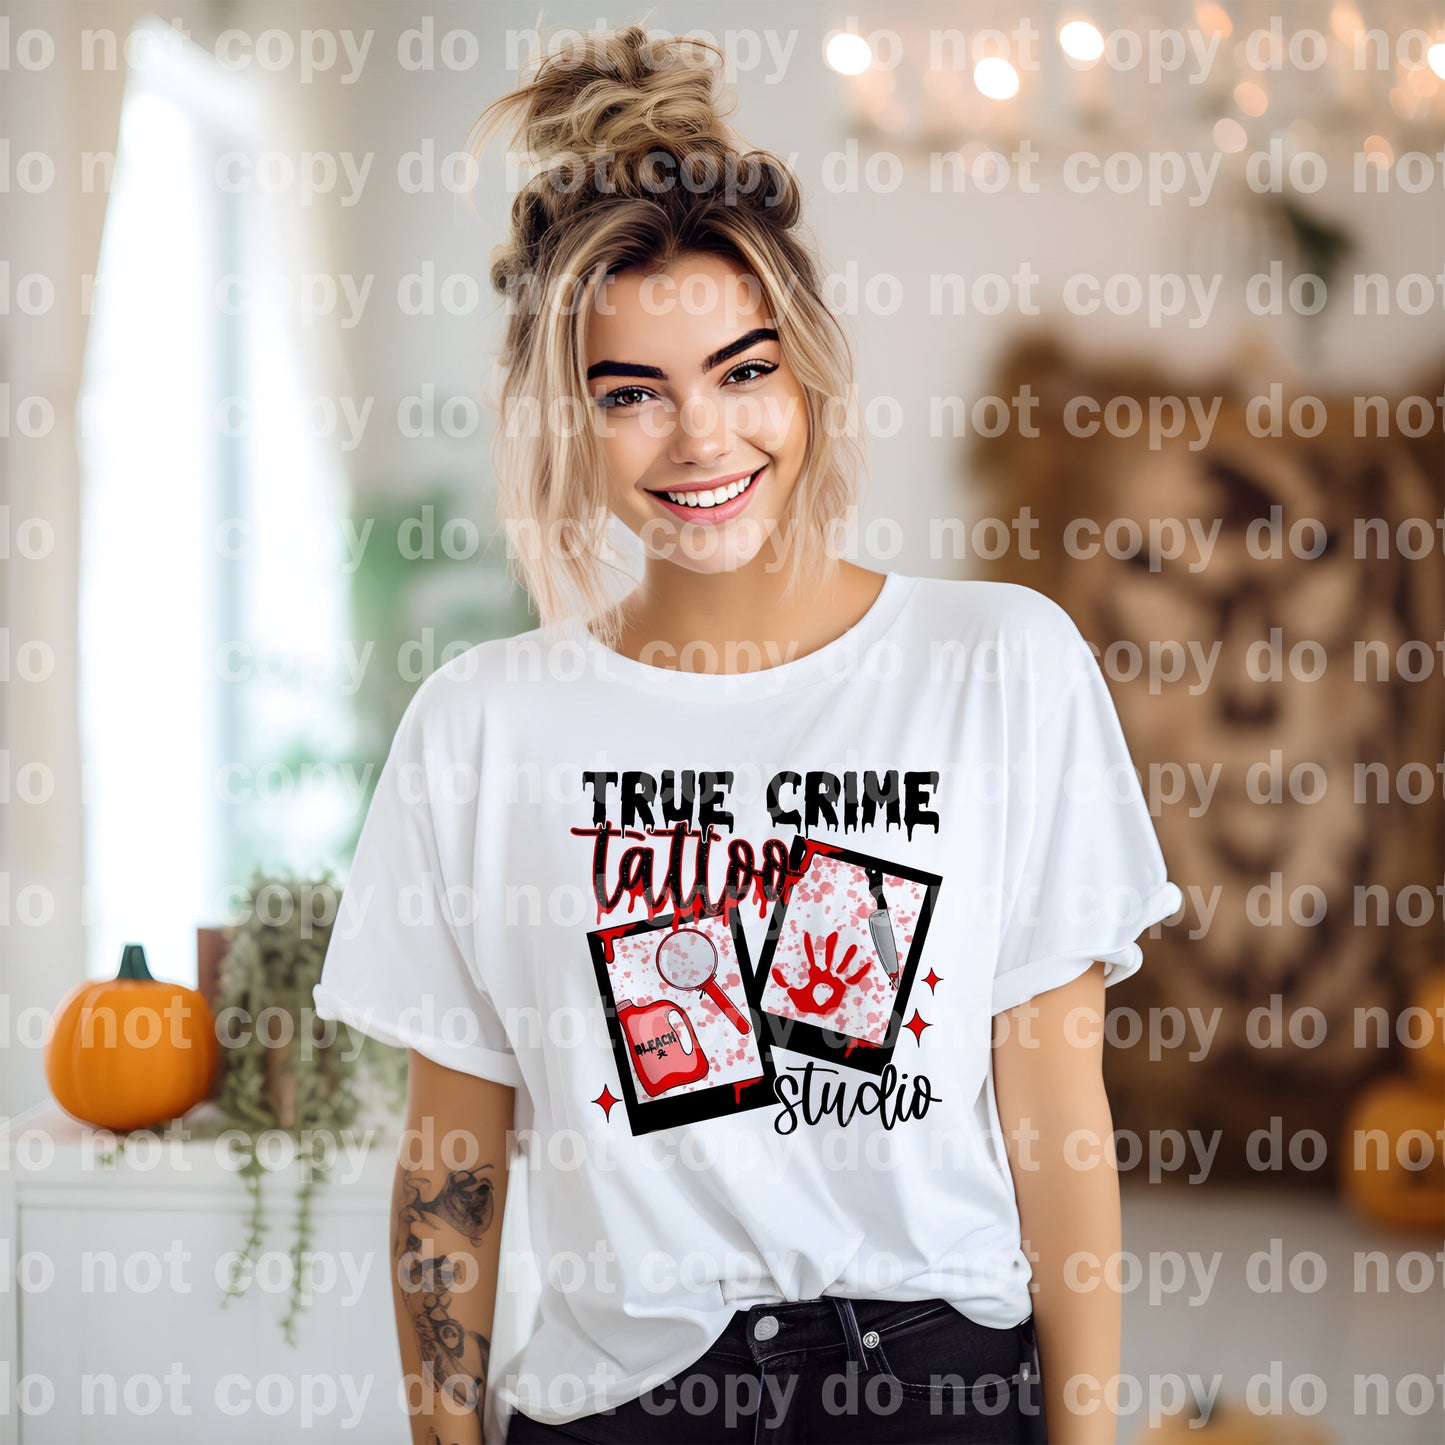 True Crime Tattoo Studio with Optional Two Rows Sleeve Designs Dream Print or Sublimation Print